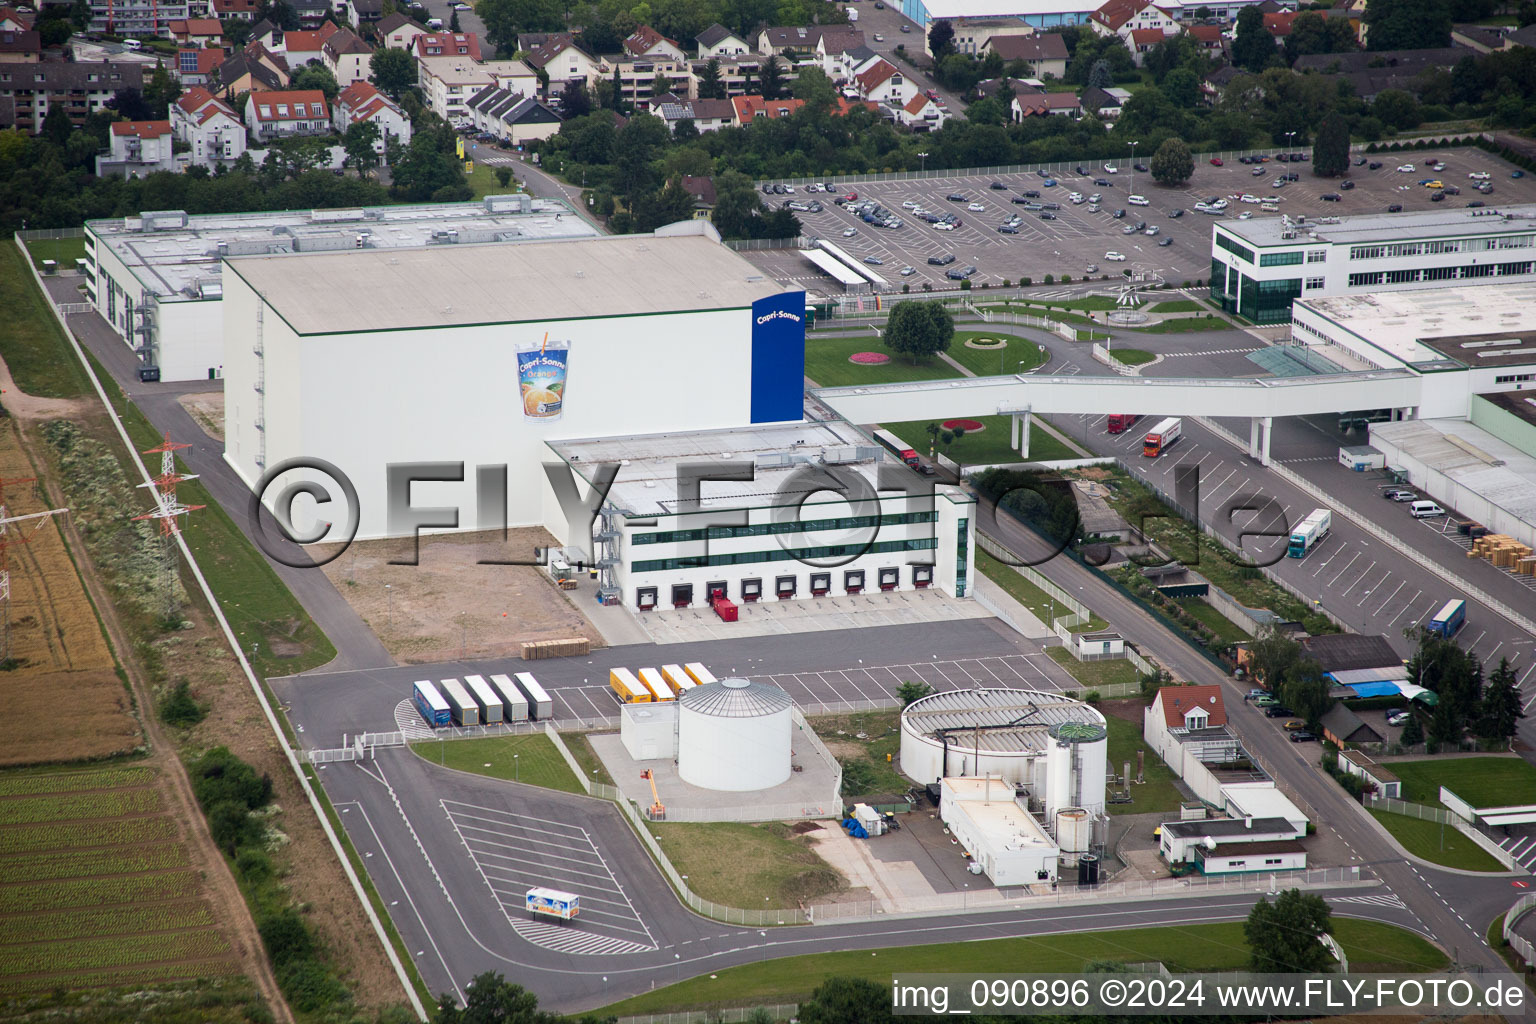 Aerial photograpy of Wild works in Eppelheim in the state Baden-Wuerttemberg, Germany